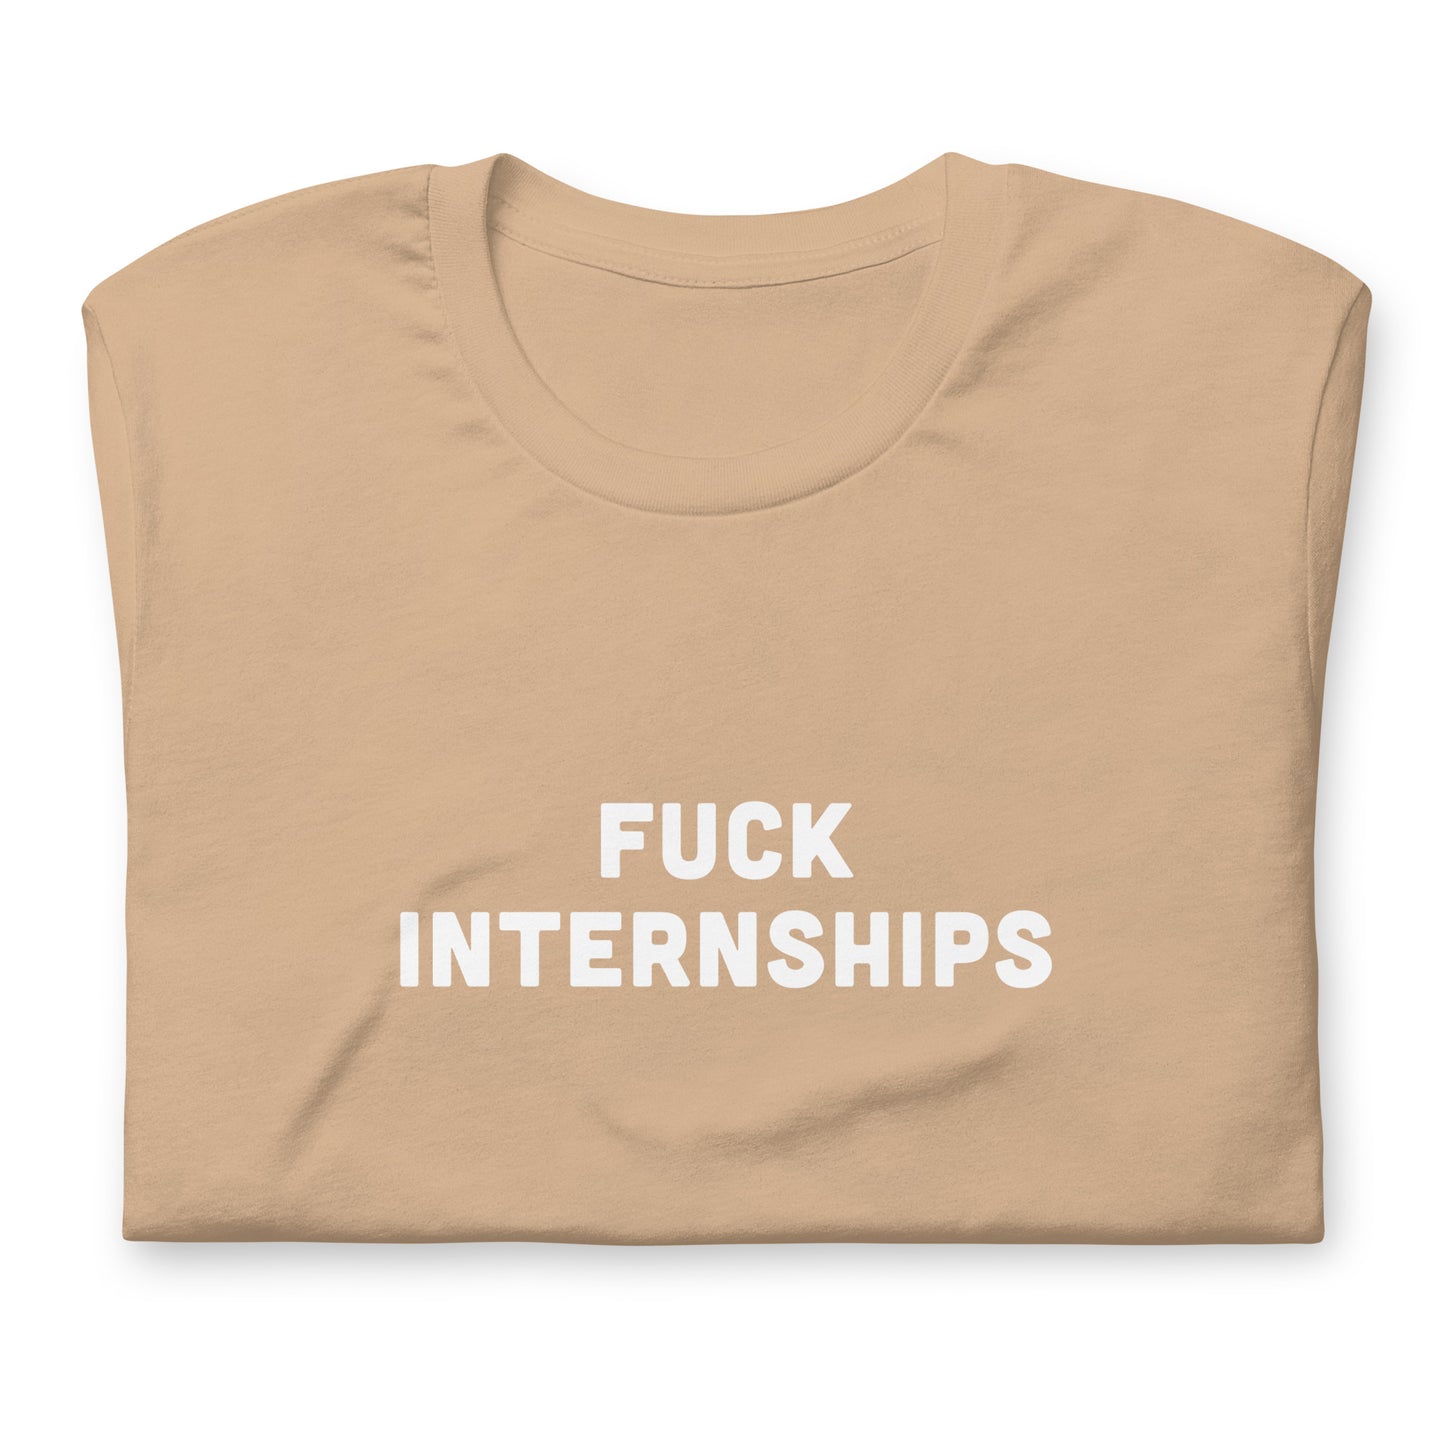 Fuck Interships T-Shirt Size XL Color Forest